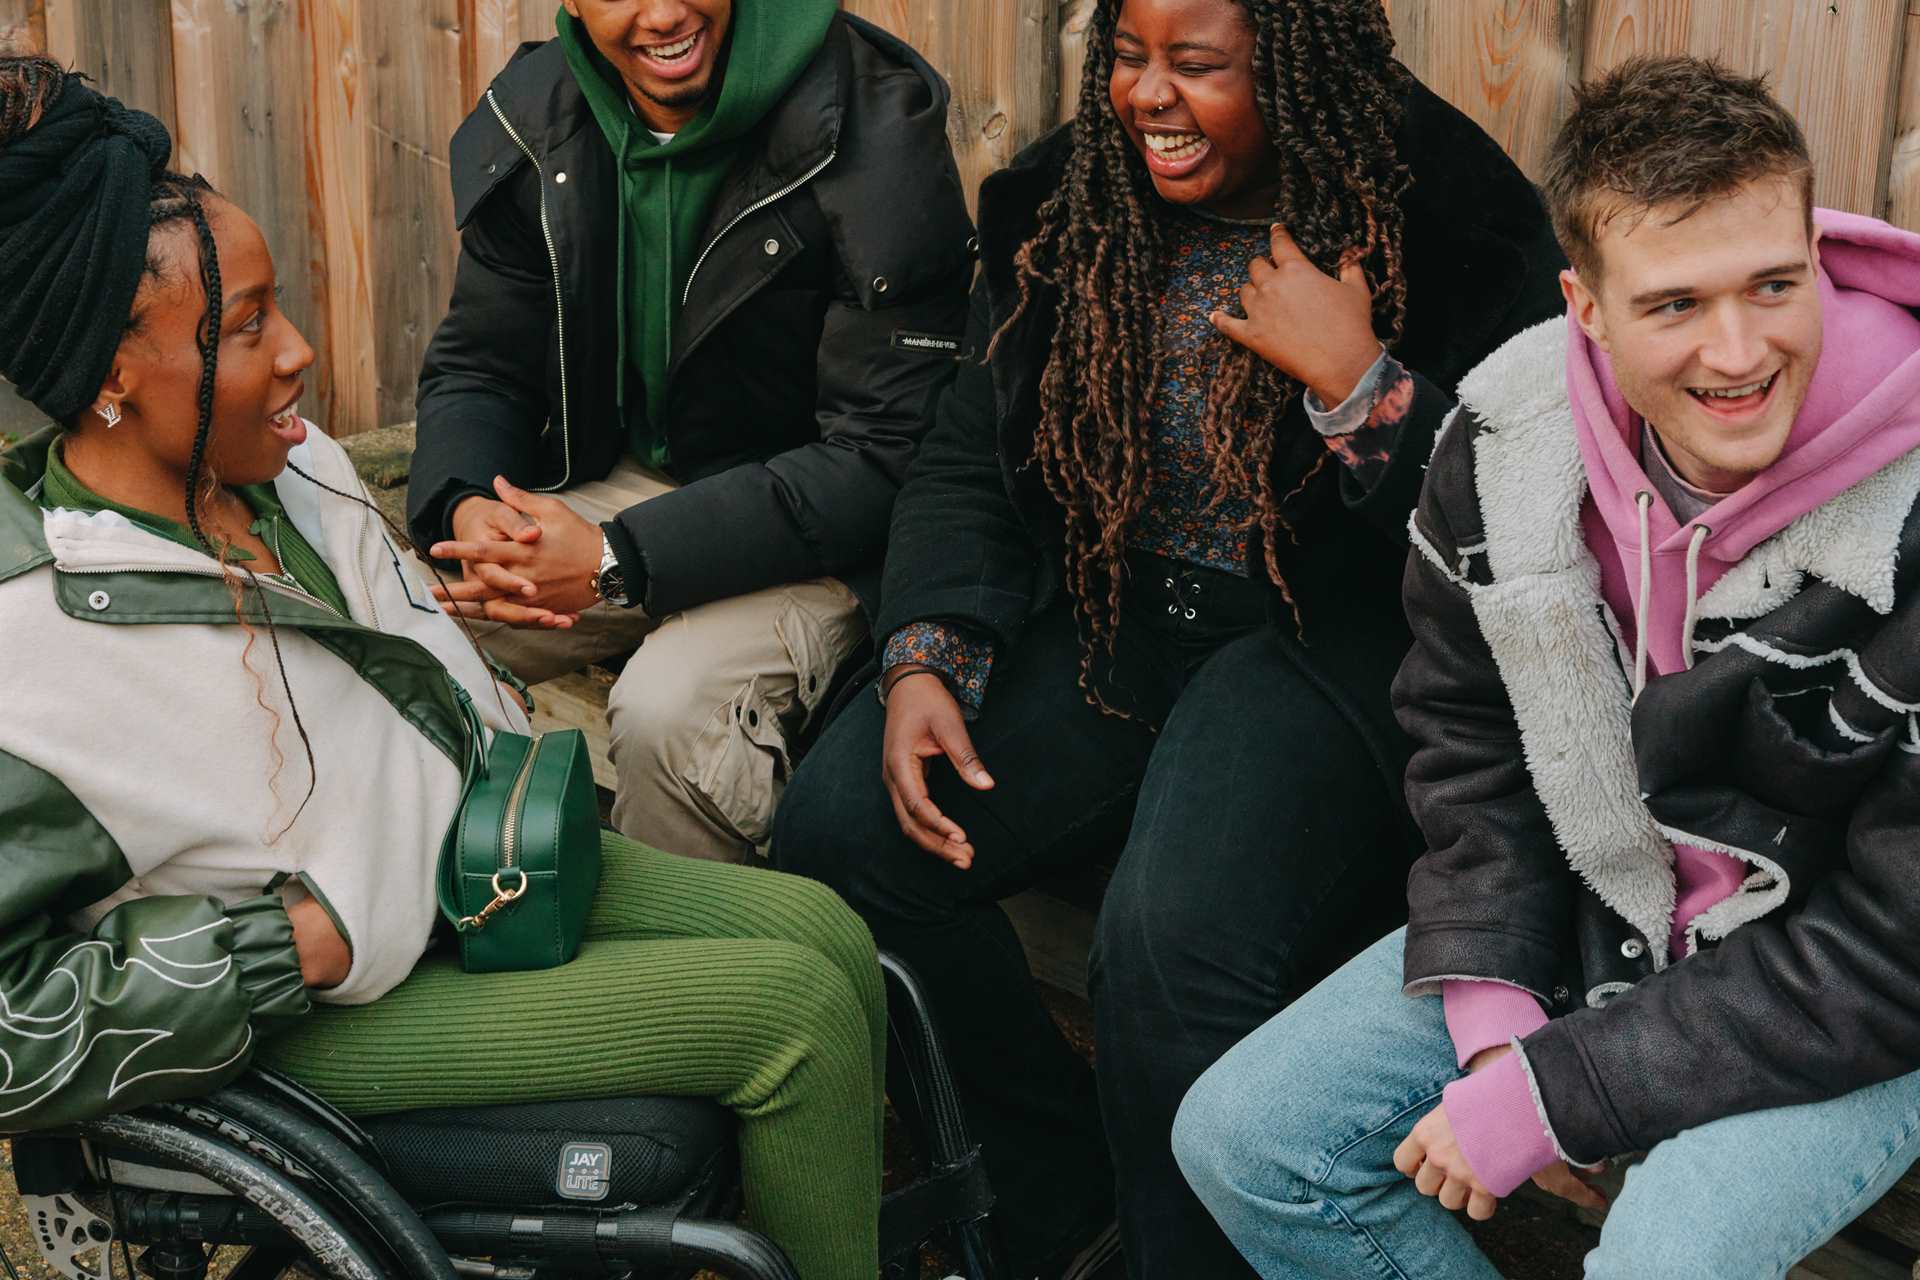 A group of young people laughing together outside on a bench. Group includes two Black young women (one in a wheelchair), one Black young man, and a white young man.